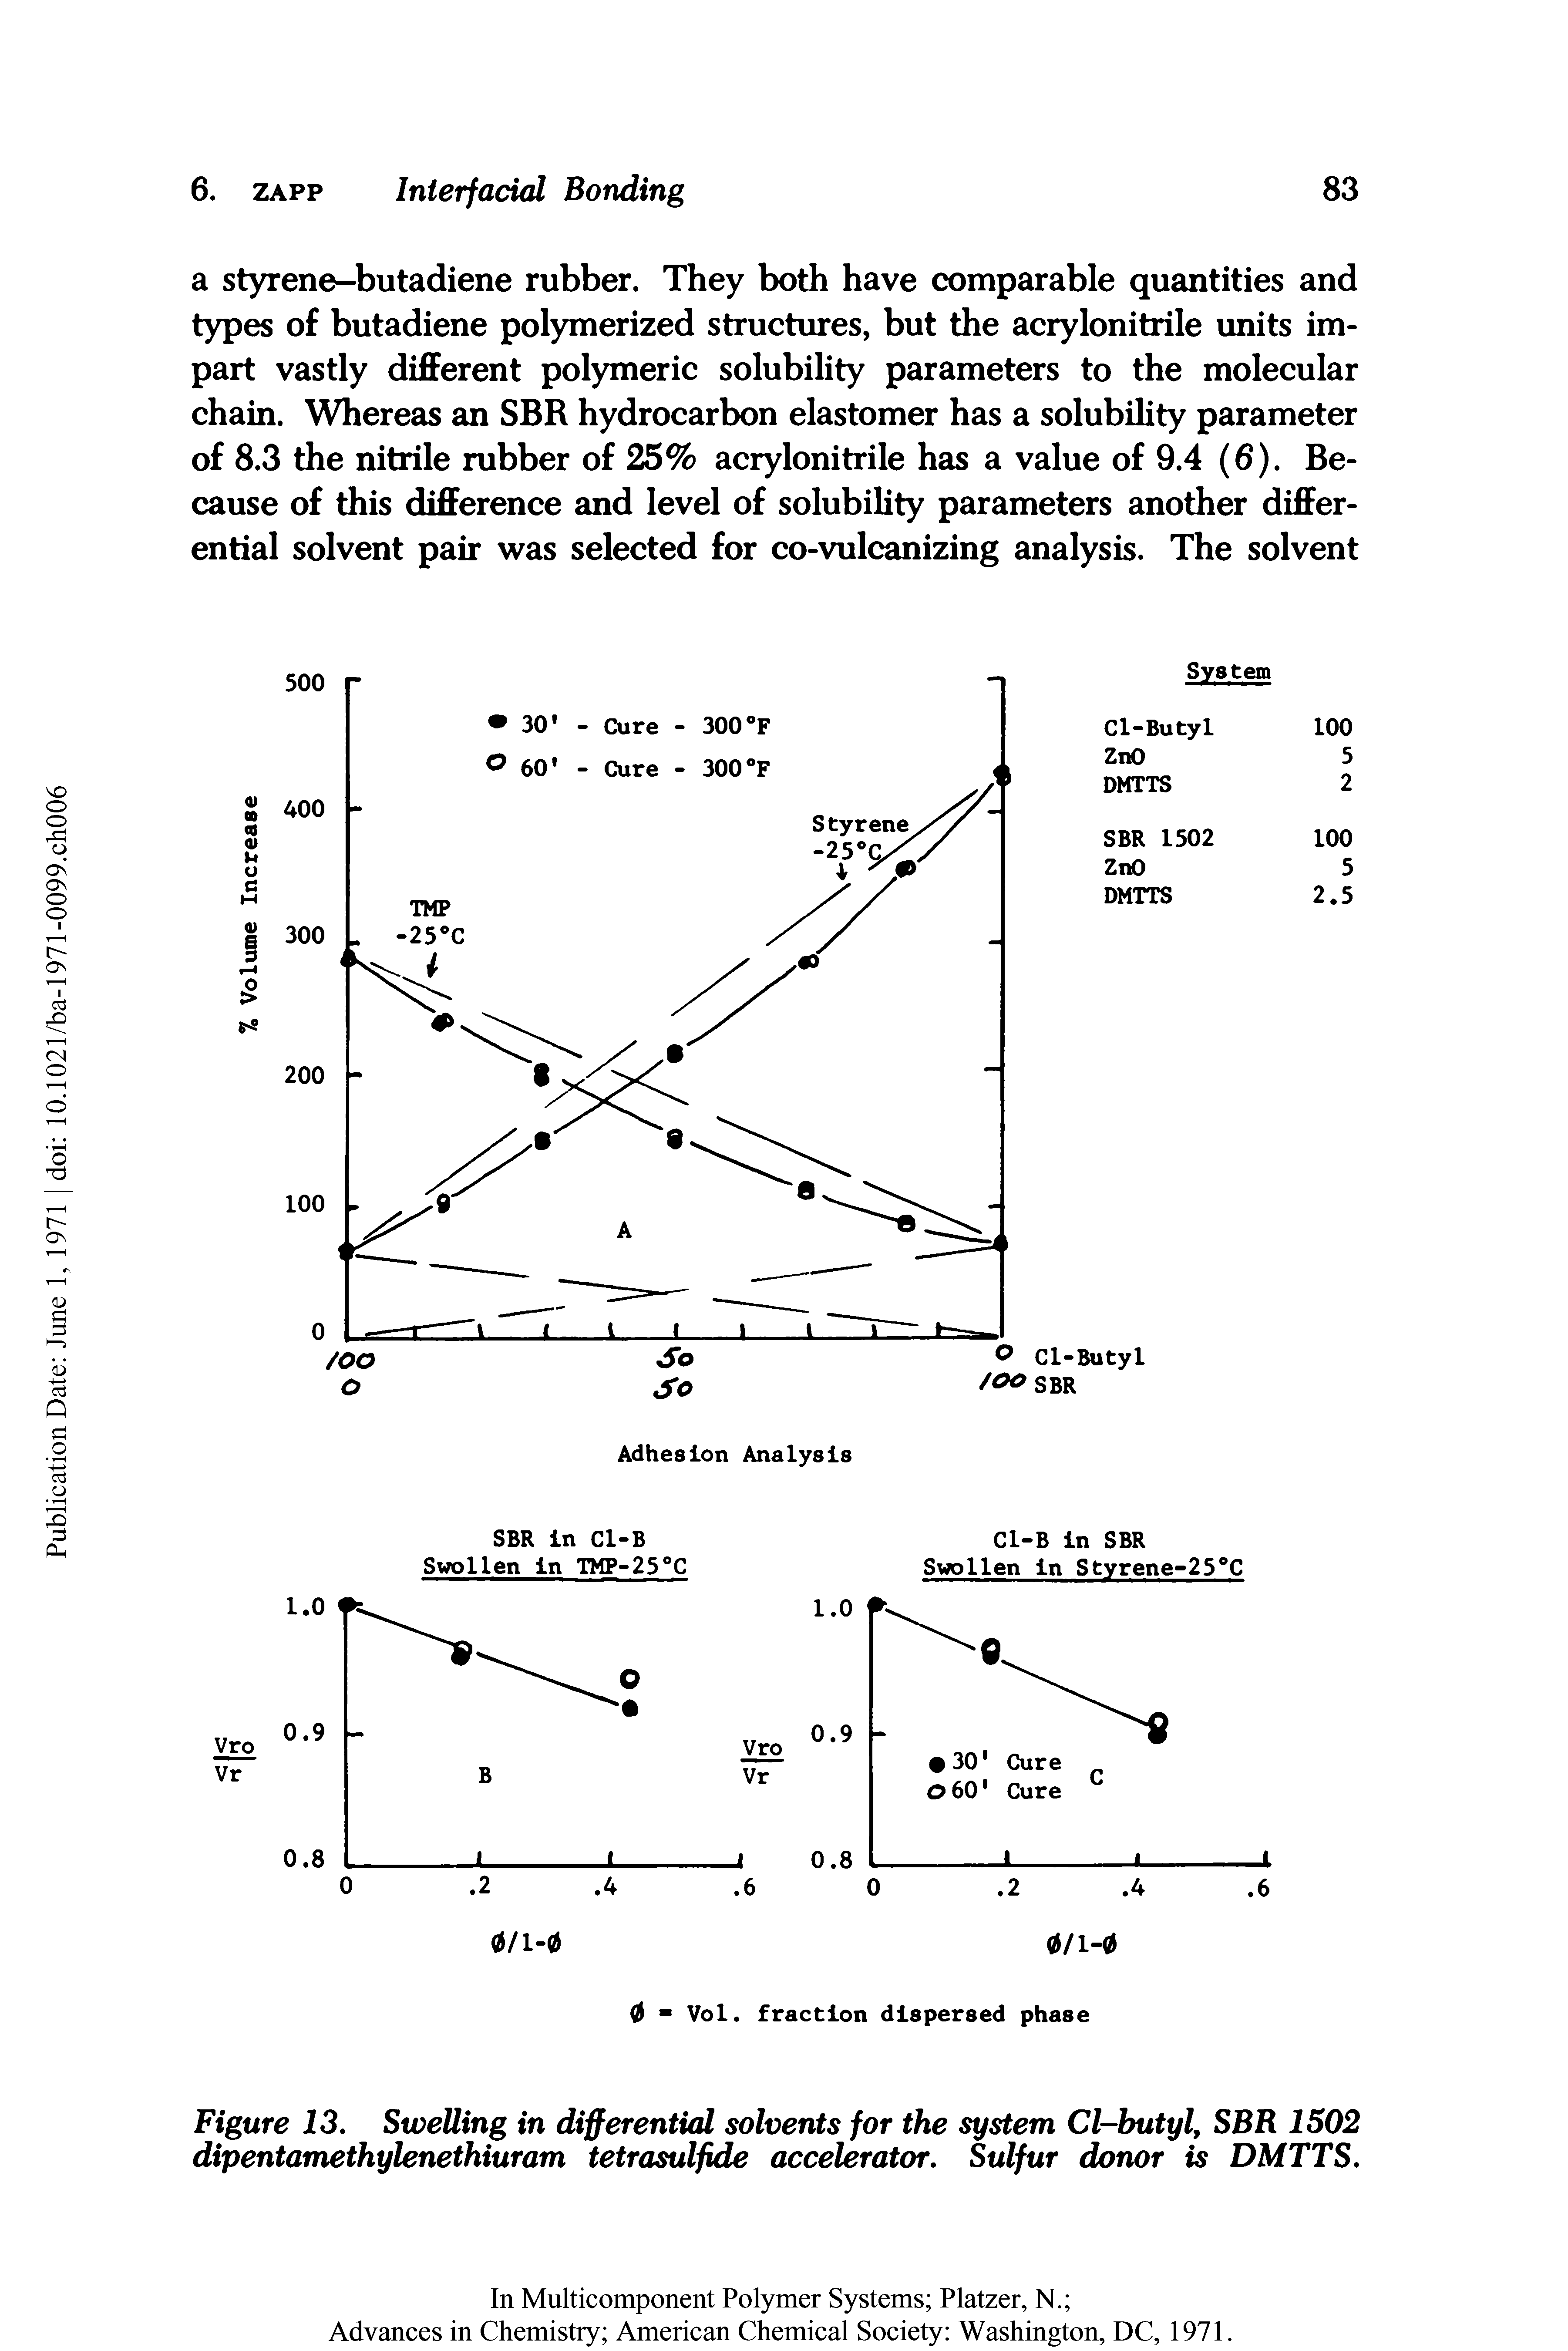 Figure 13. Swelling in differential solvents for the system Cl-butyl, SBR 1502 dipentamethylenethiuram tetrasulfide accelerator. Sulfur donor is DMTTS.